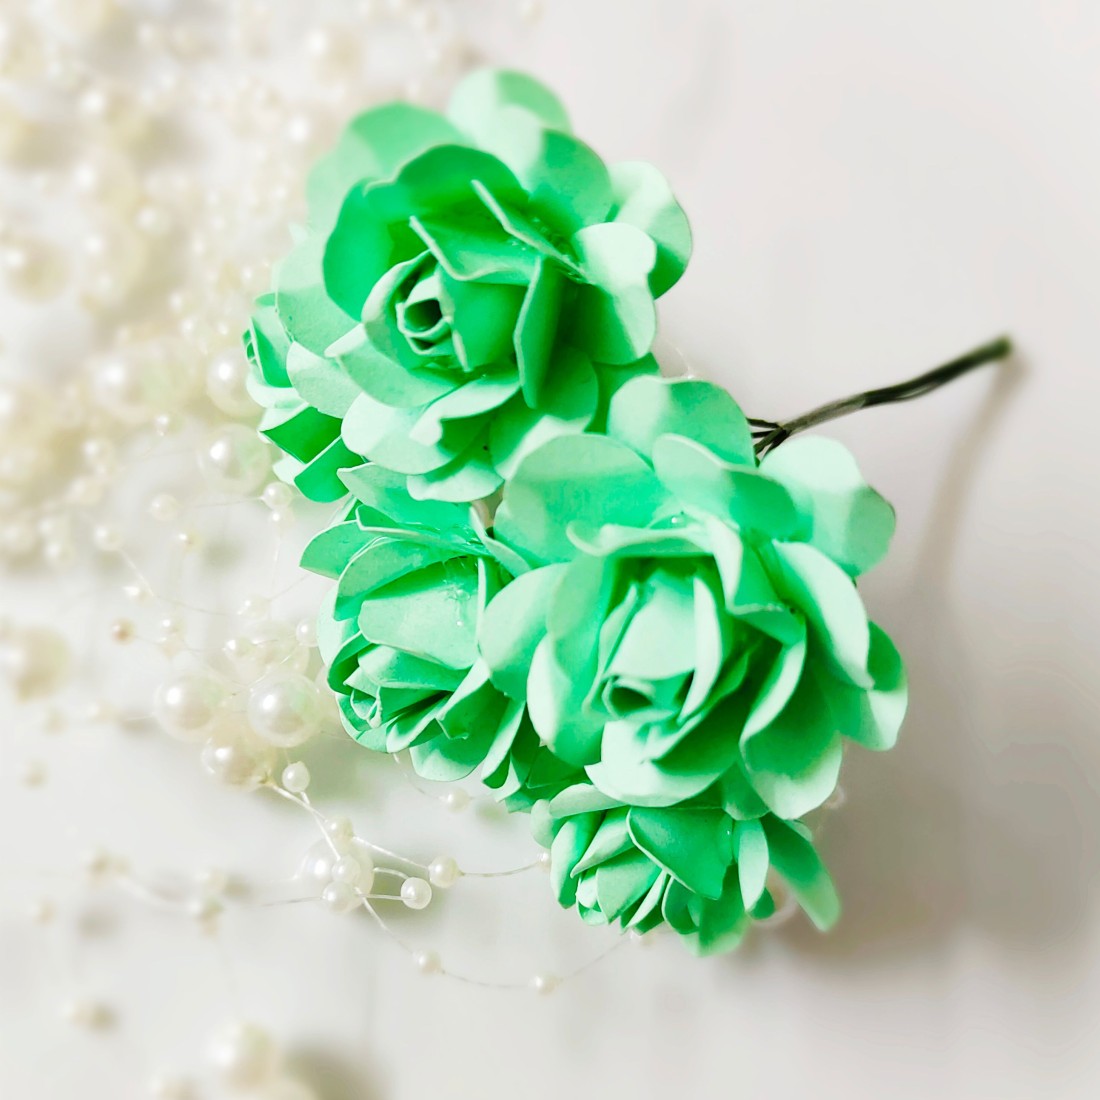 Craftyscrappers Paper Flowers - ROSE (MIXED)